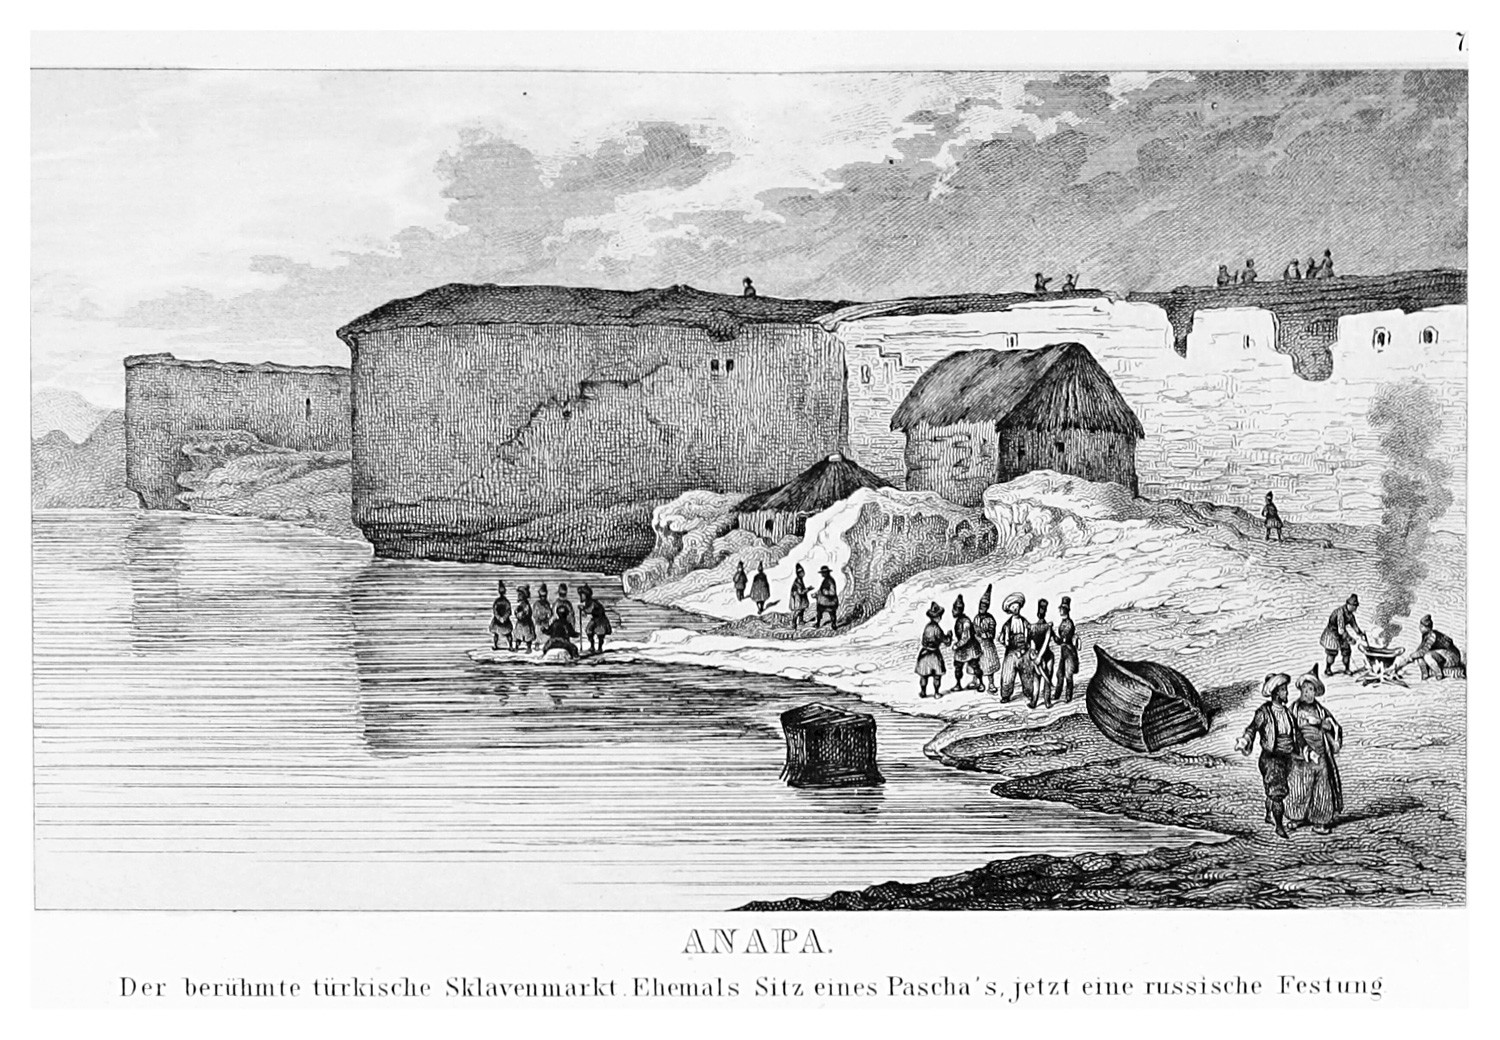 The Turkish fortress Anapa was known as a huge slave market